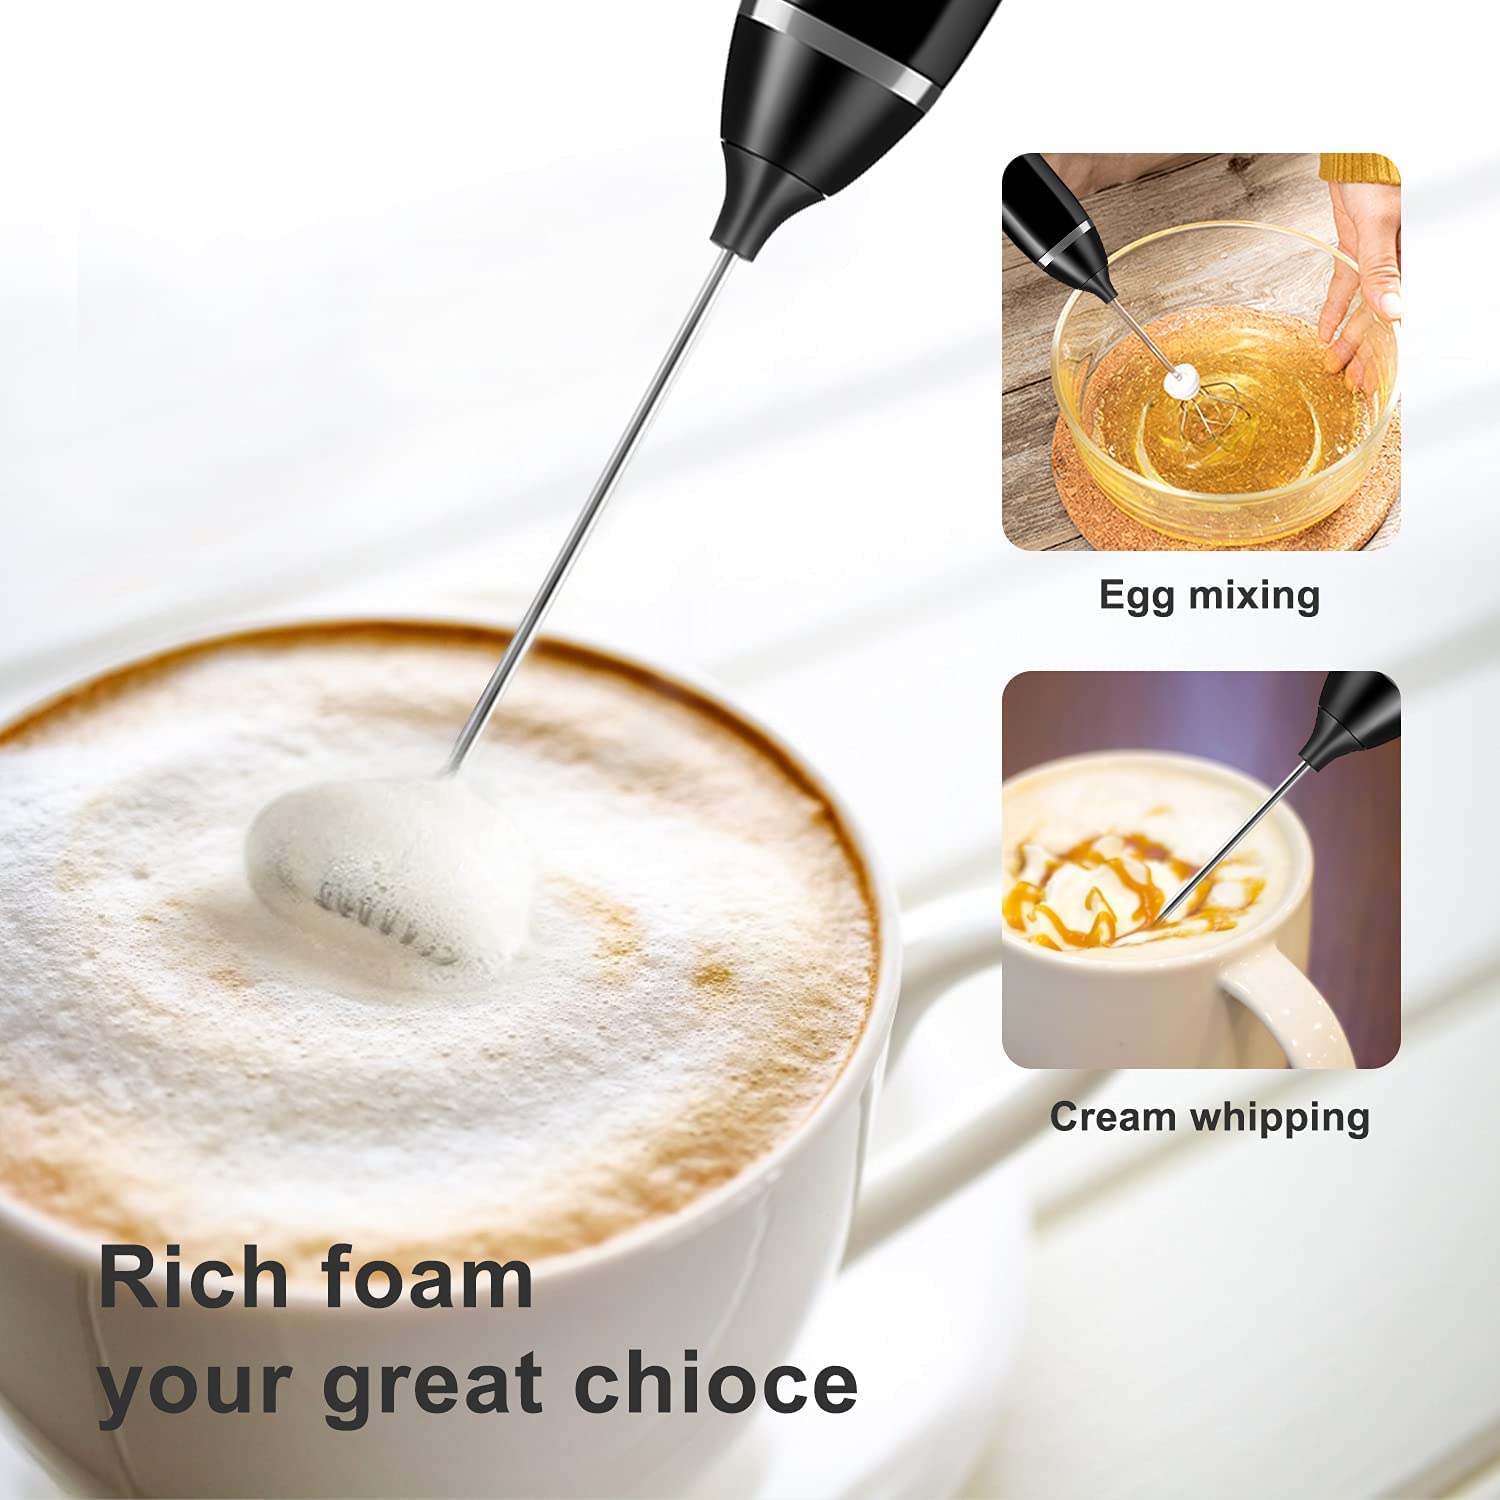 Fivtyily Milk Frother Handheld Rechargeable Foam Maker for Lattes, Electric Drink Mixer with 2 Whisks for Bulletproof Coffee, Mini Foamer for Cappuccino Frappe Matcha Hot Chocolate,16 Pcs Art Stencils